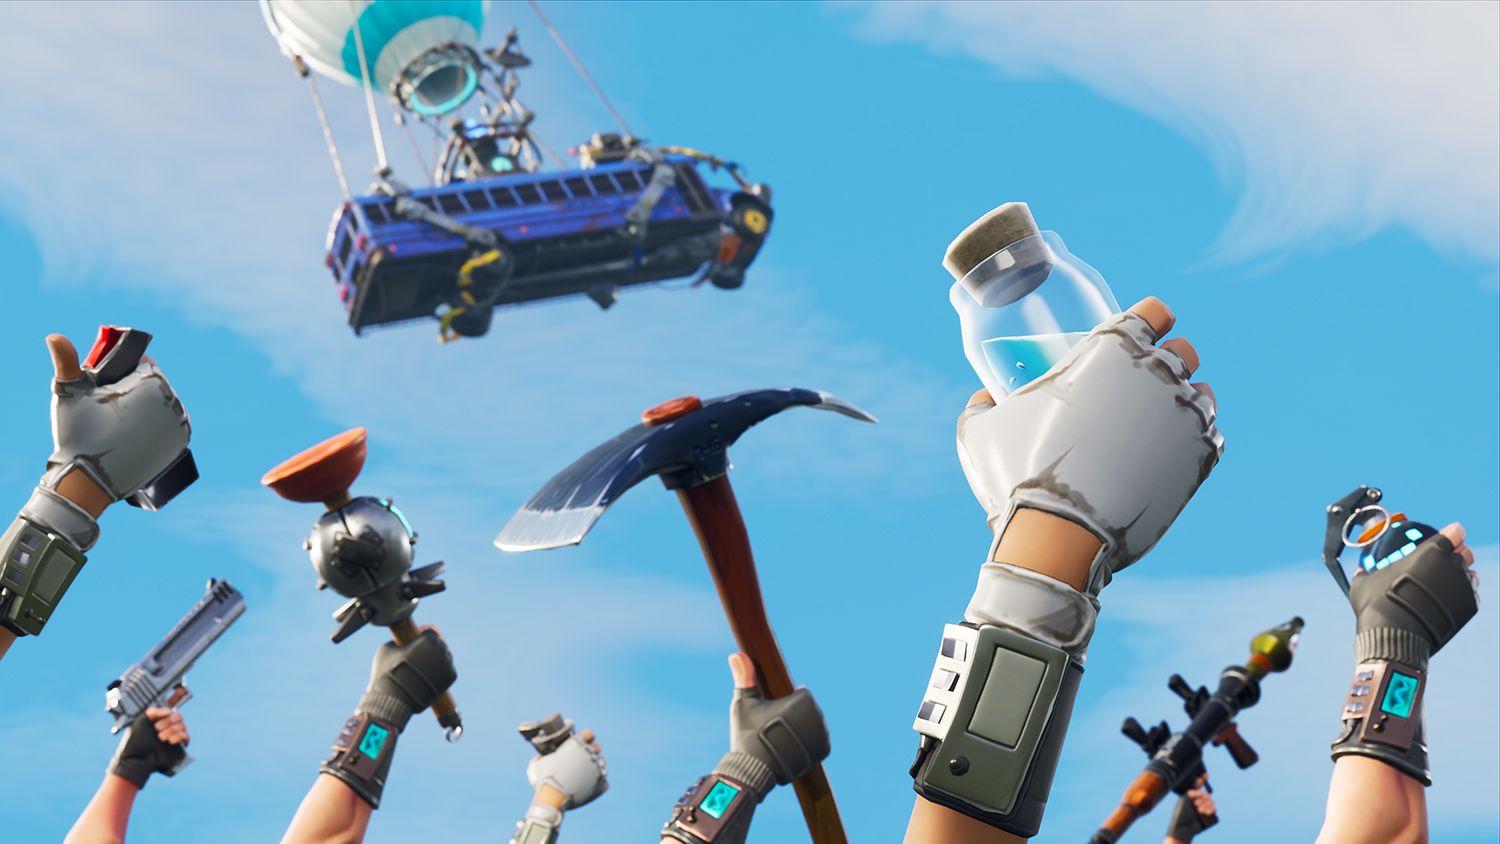 Fortnite account merging has been delayed until early 2019